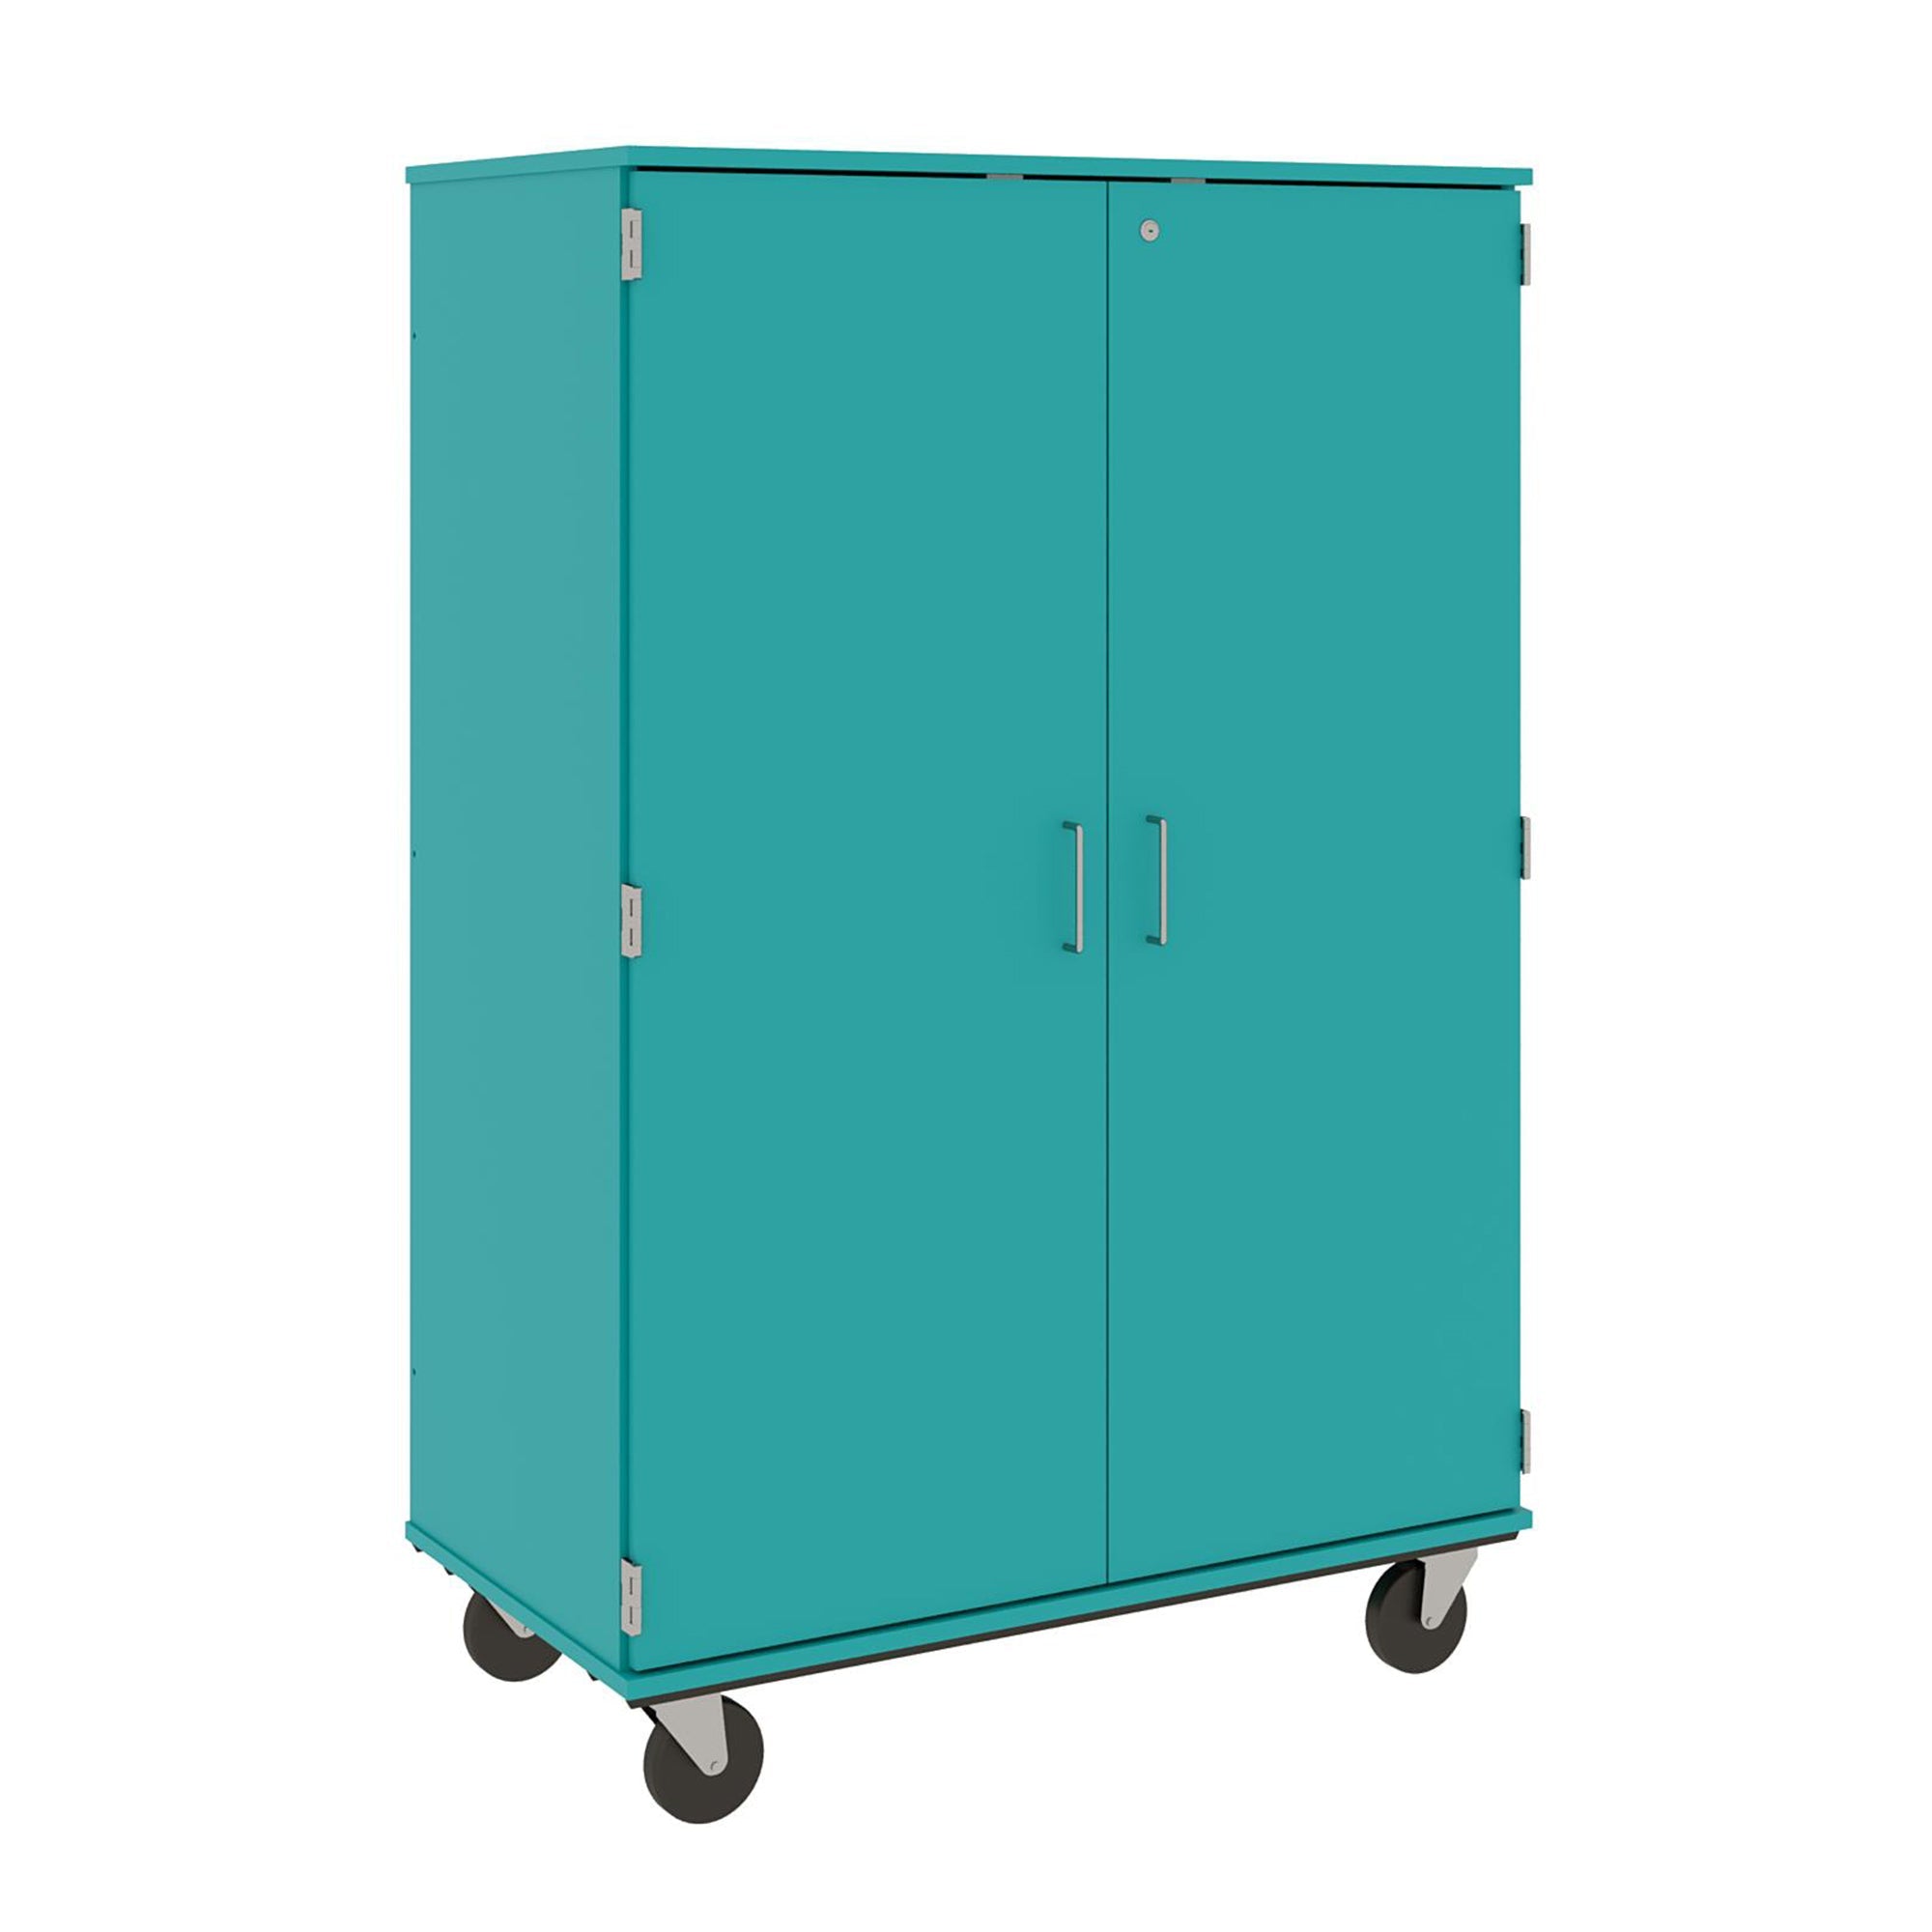 36" Assembled Mobile Bin Storage Cabinet with Doors and 36 3" Bins - 80243 F67